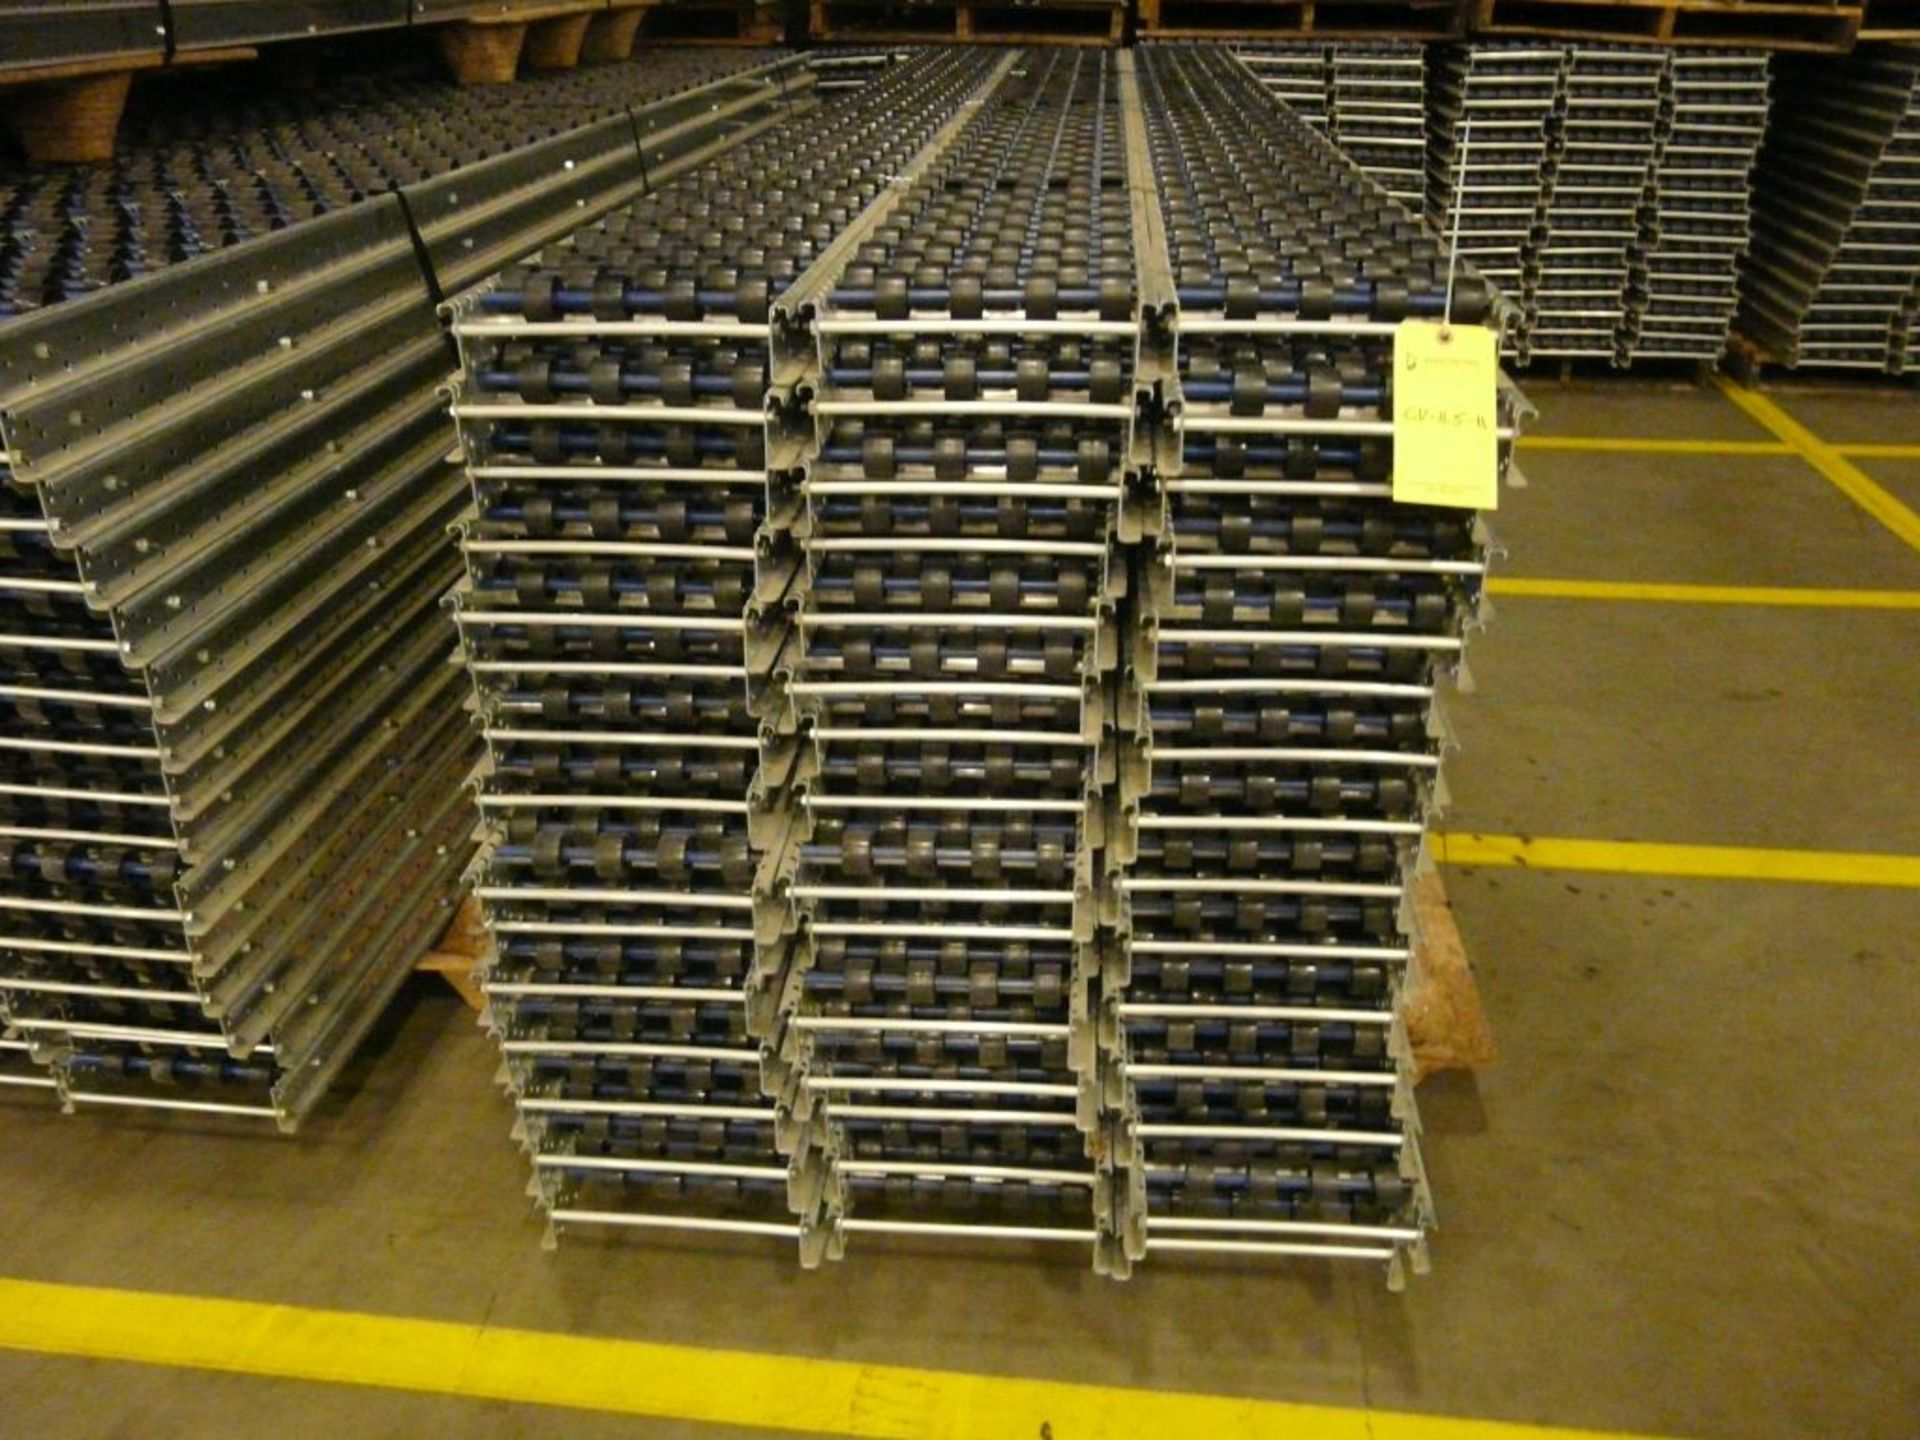 Lot of (90) SpanTrack Wheelbed Carton Flow Conveyors - 11.5'L x 11"W; Tag: 224232 - $30 Lot - Image 2 of 4